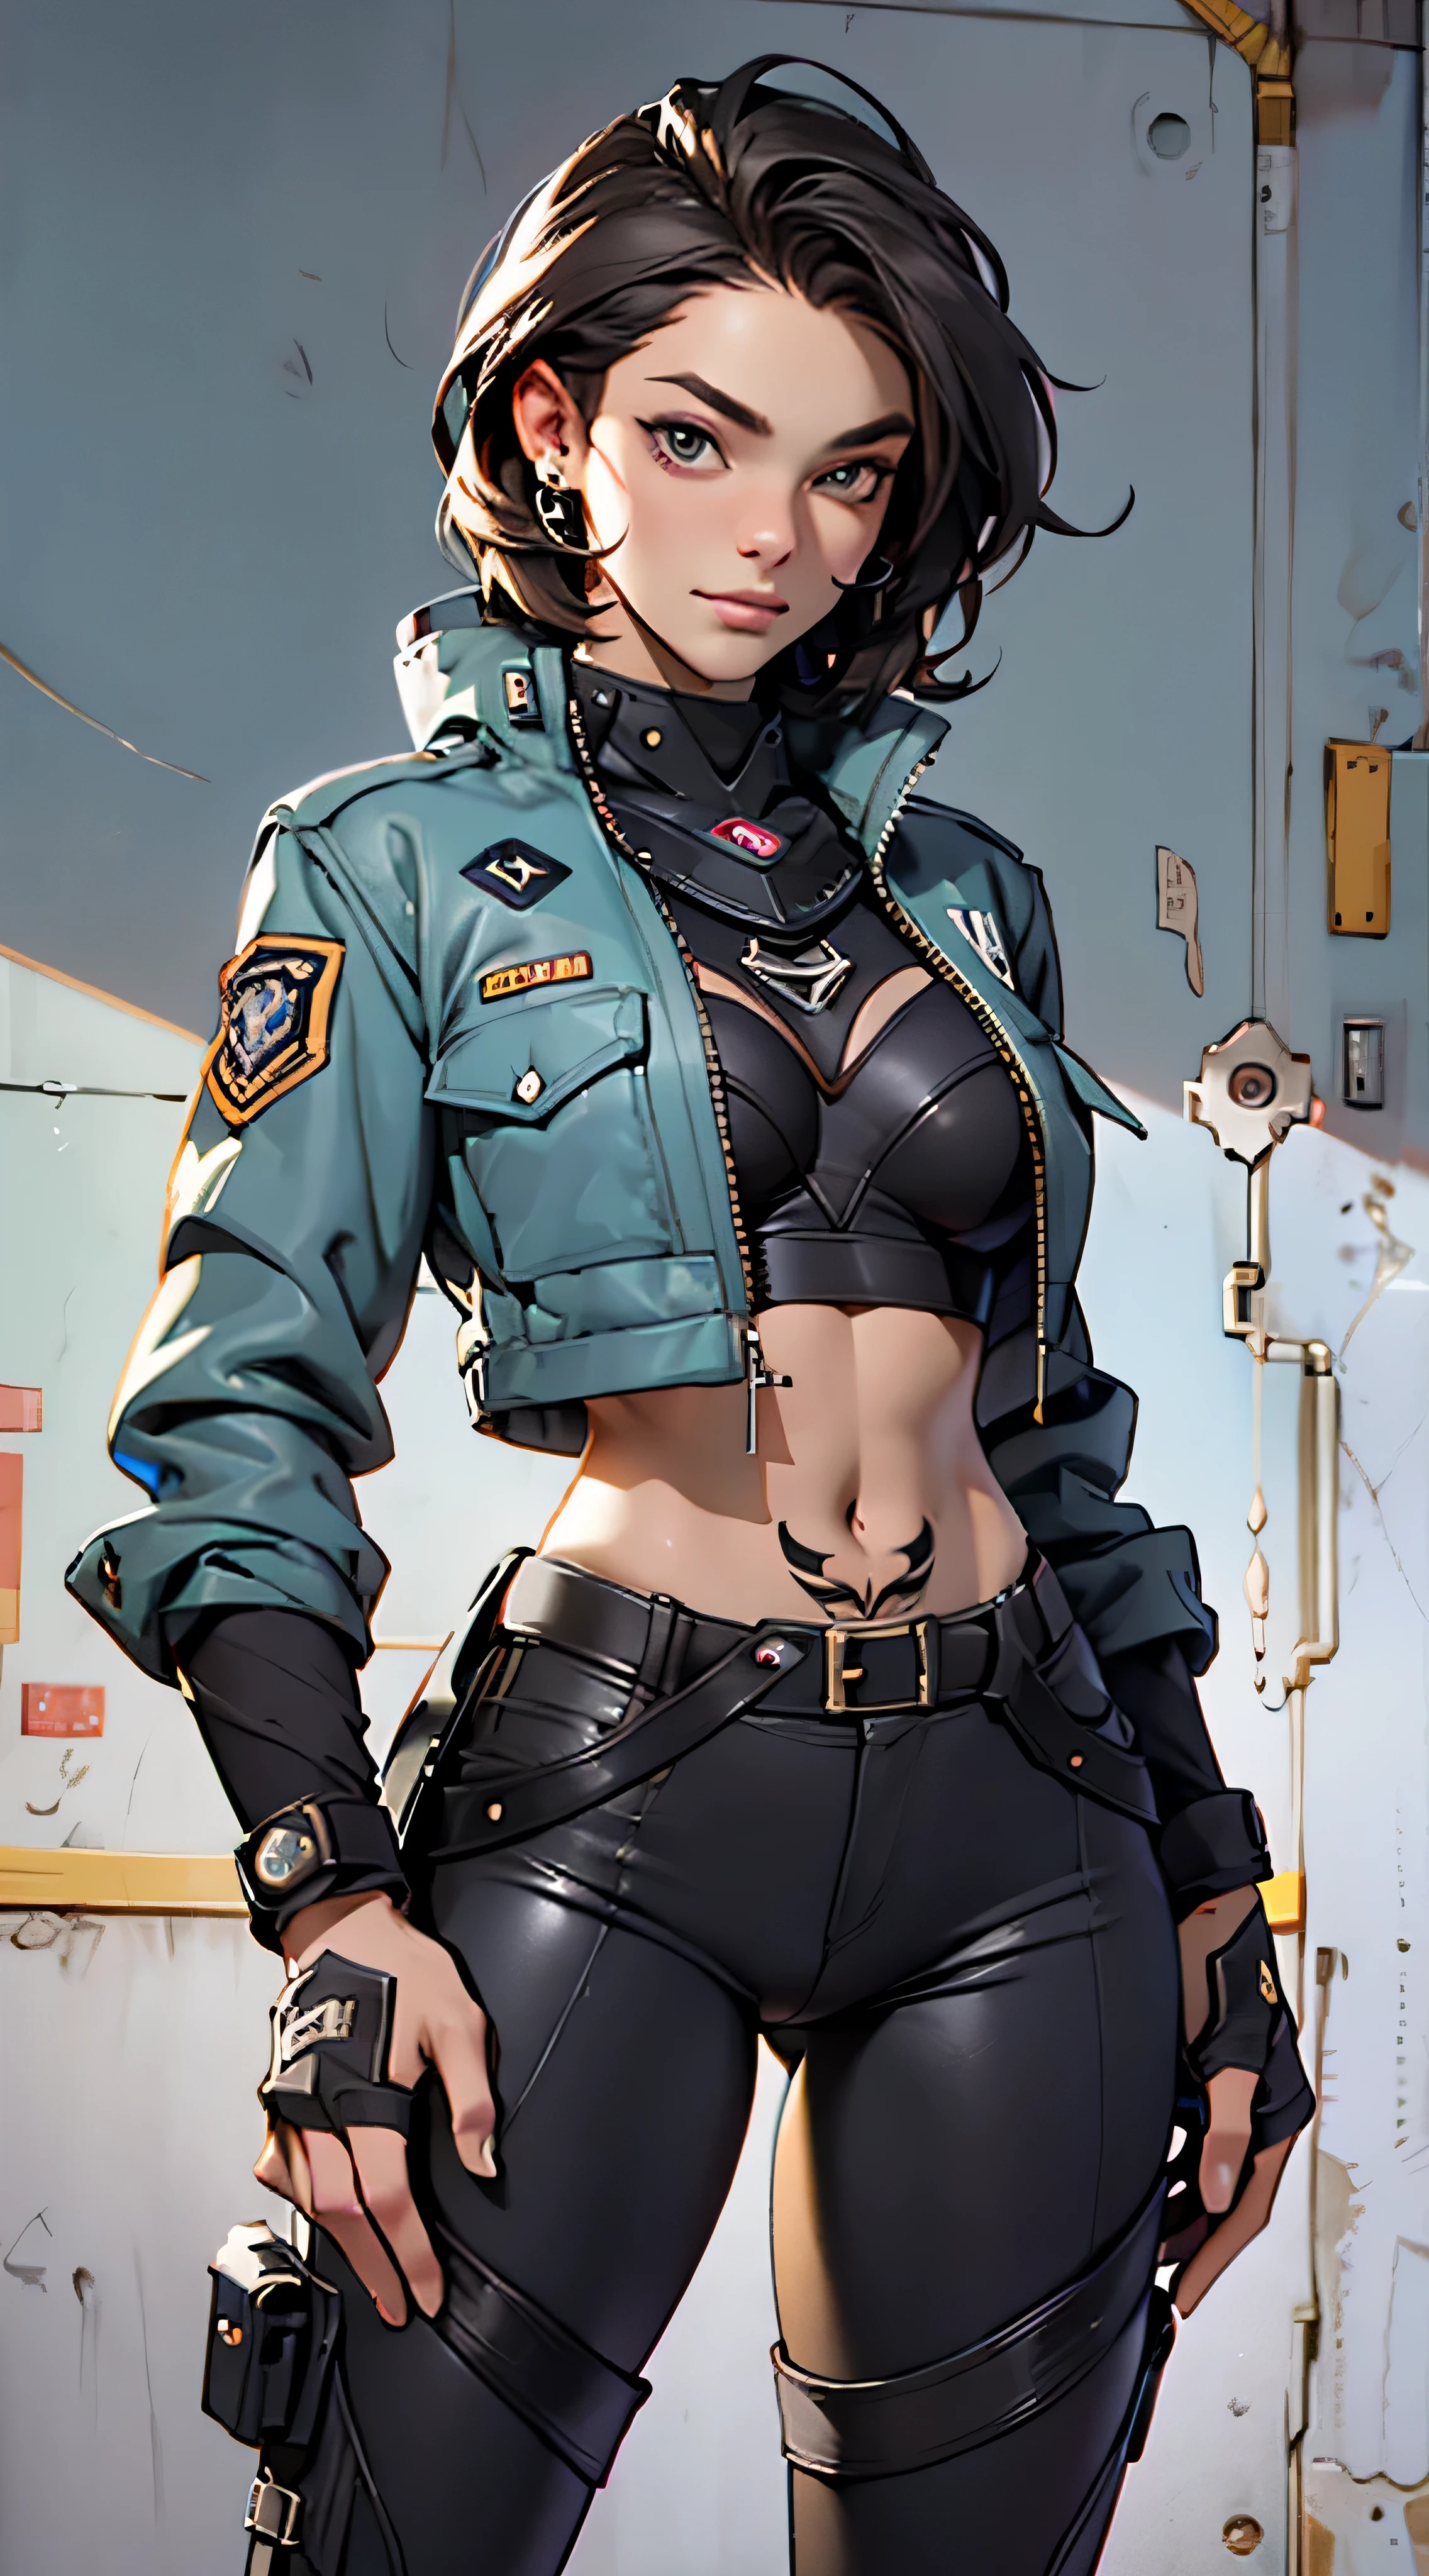 11:23(((Best quality: 1.4))),(Unbeatable masterpiece), (hyper HD),(Hyper-realistic 8k CG)、（Cross one hand at your waist），（dark colored hair） ((( body))), (((1 girl in))), 25-year-old American soldier with perfect body,,Beautiful and well groomed face,muscular body:1.2,Solid royal blue jacket with details, (Pictures from head to thighs)， Complex equipment, purpleish color，long trousers，The clothes inside are dark，Clothes with armored metal electronic parts, Poison tattoos )